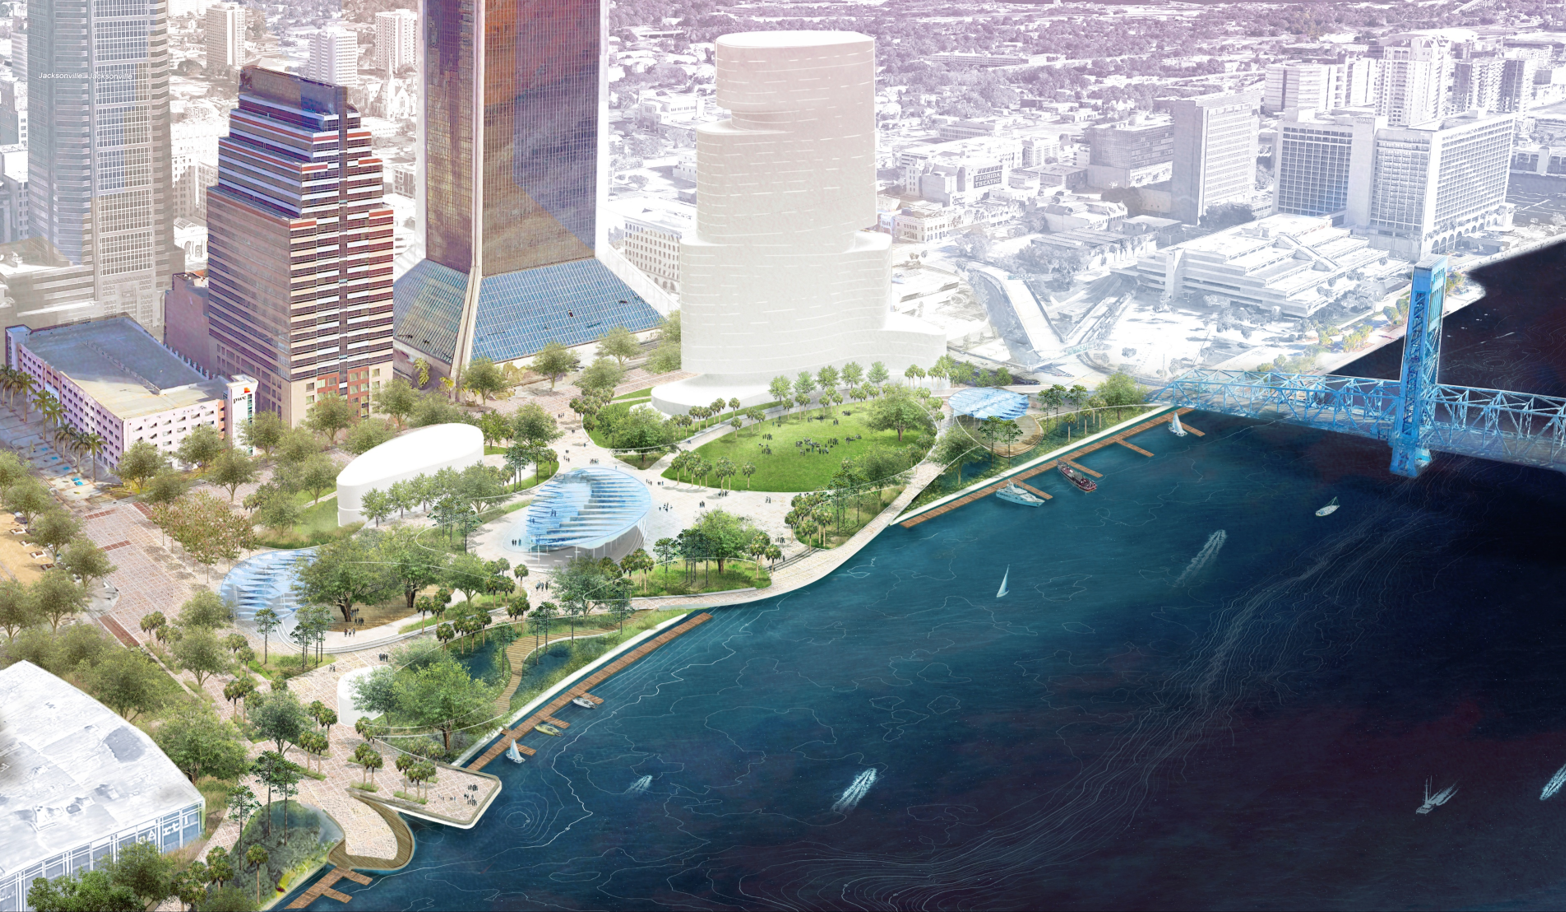 The Agency Landscape + Planning LLC aerial rendering of the Riverfront Plaza site.